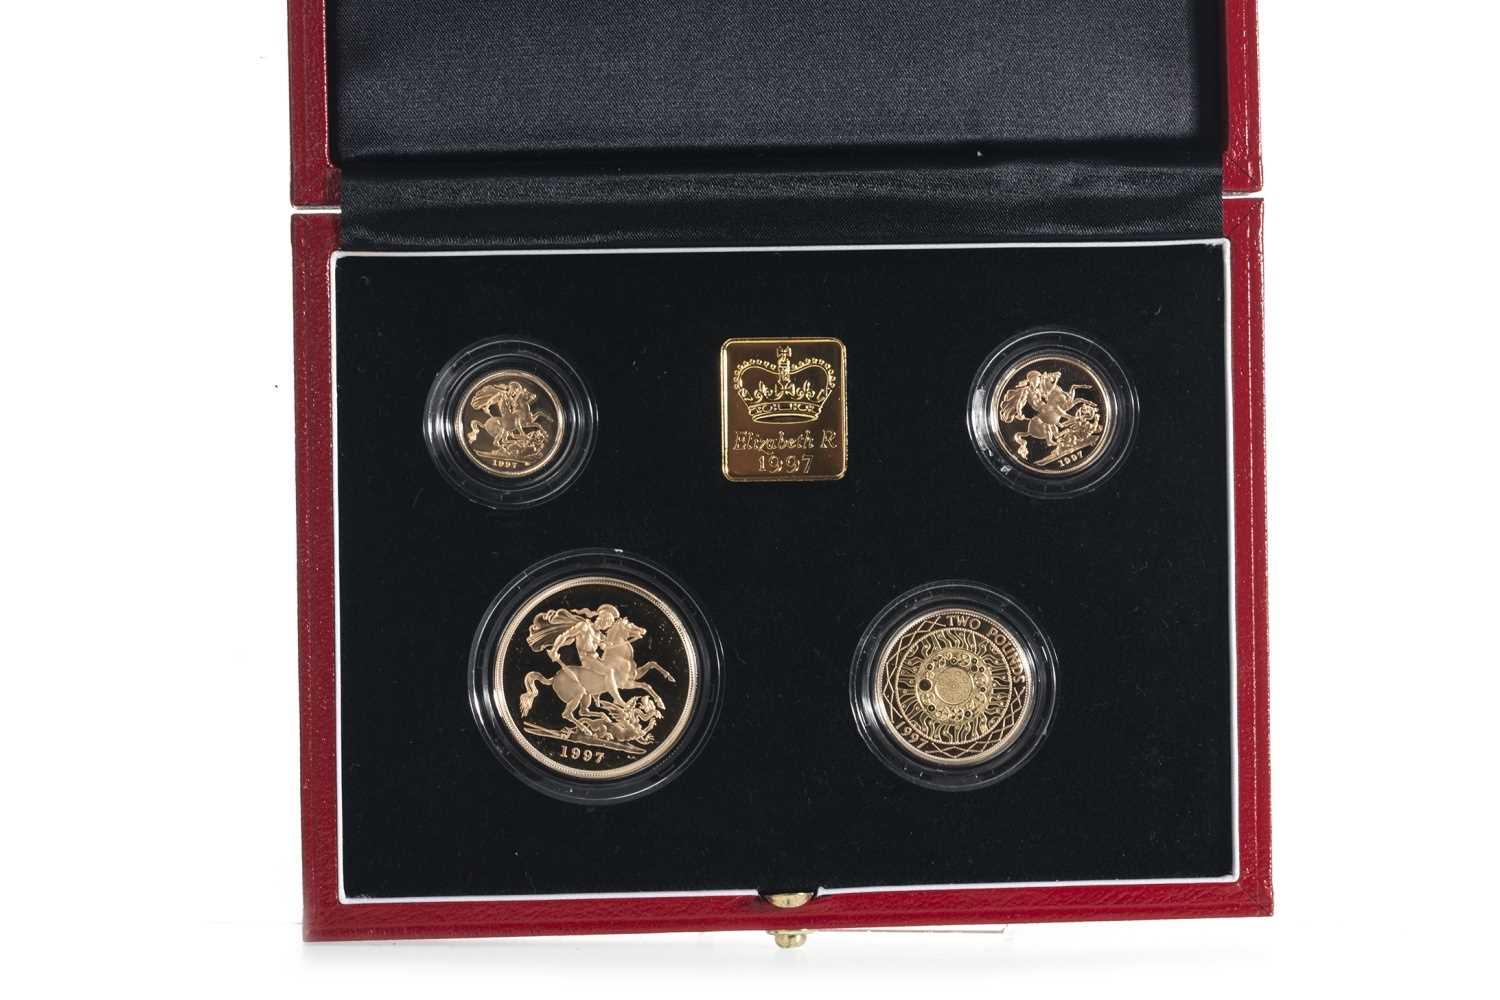 Lot 25 - A 1997 GOLD PROOF UK SOVEREIGN COLLECTION FOUR COIN SET